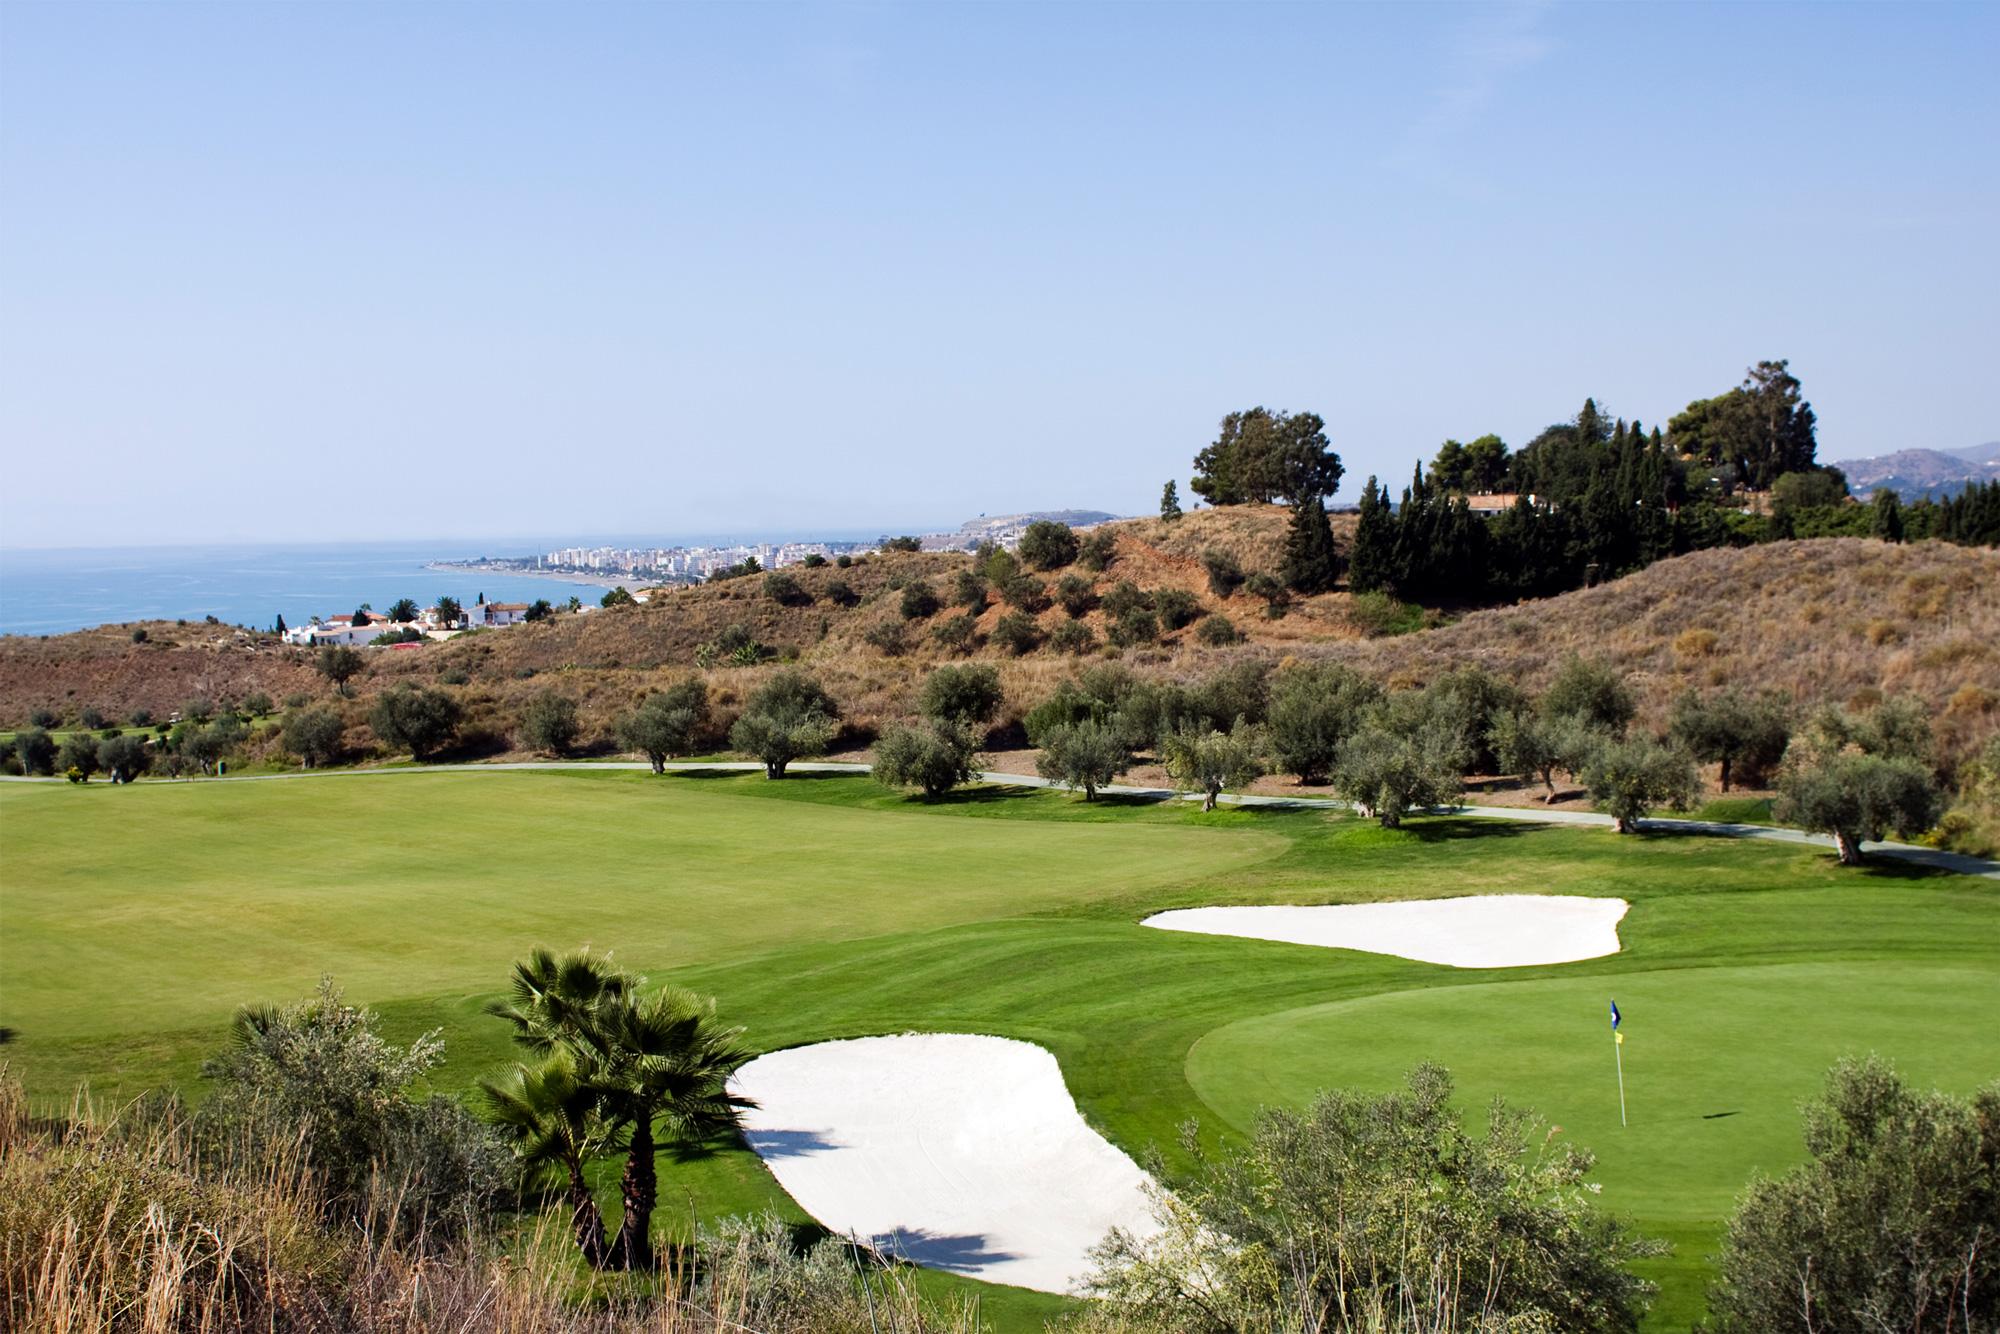 The Baviera Golf's lovely golf course within striking Costa Del Sol.